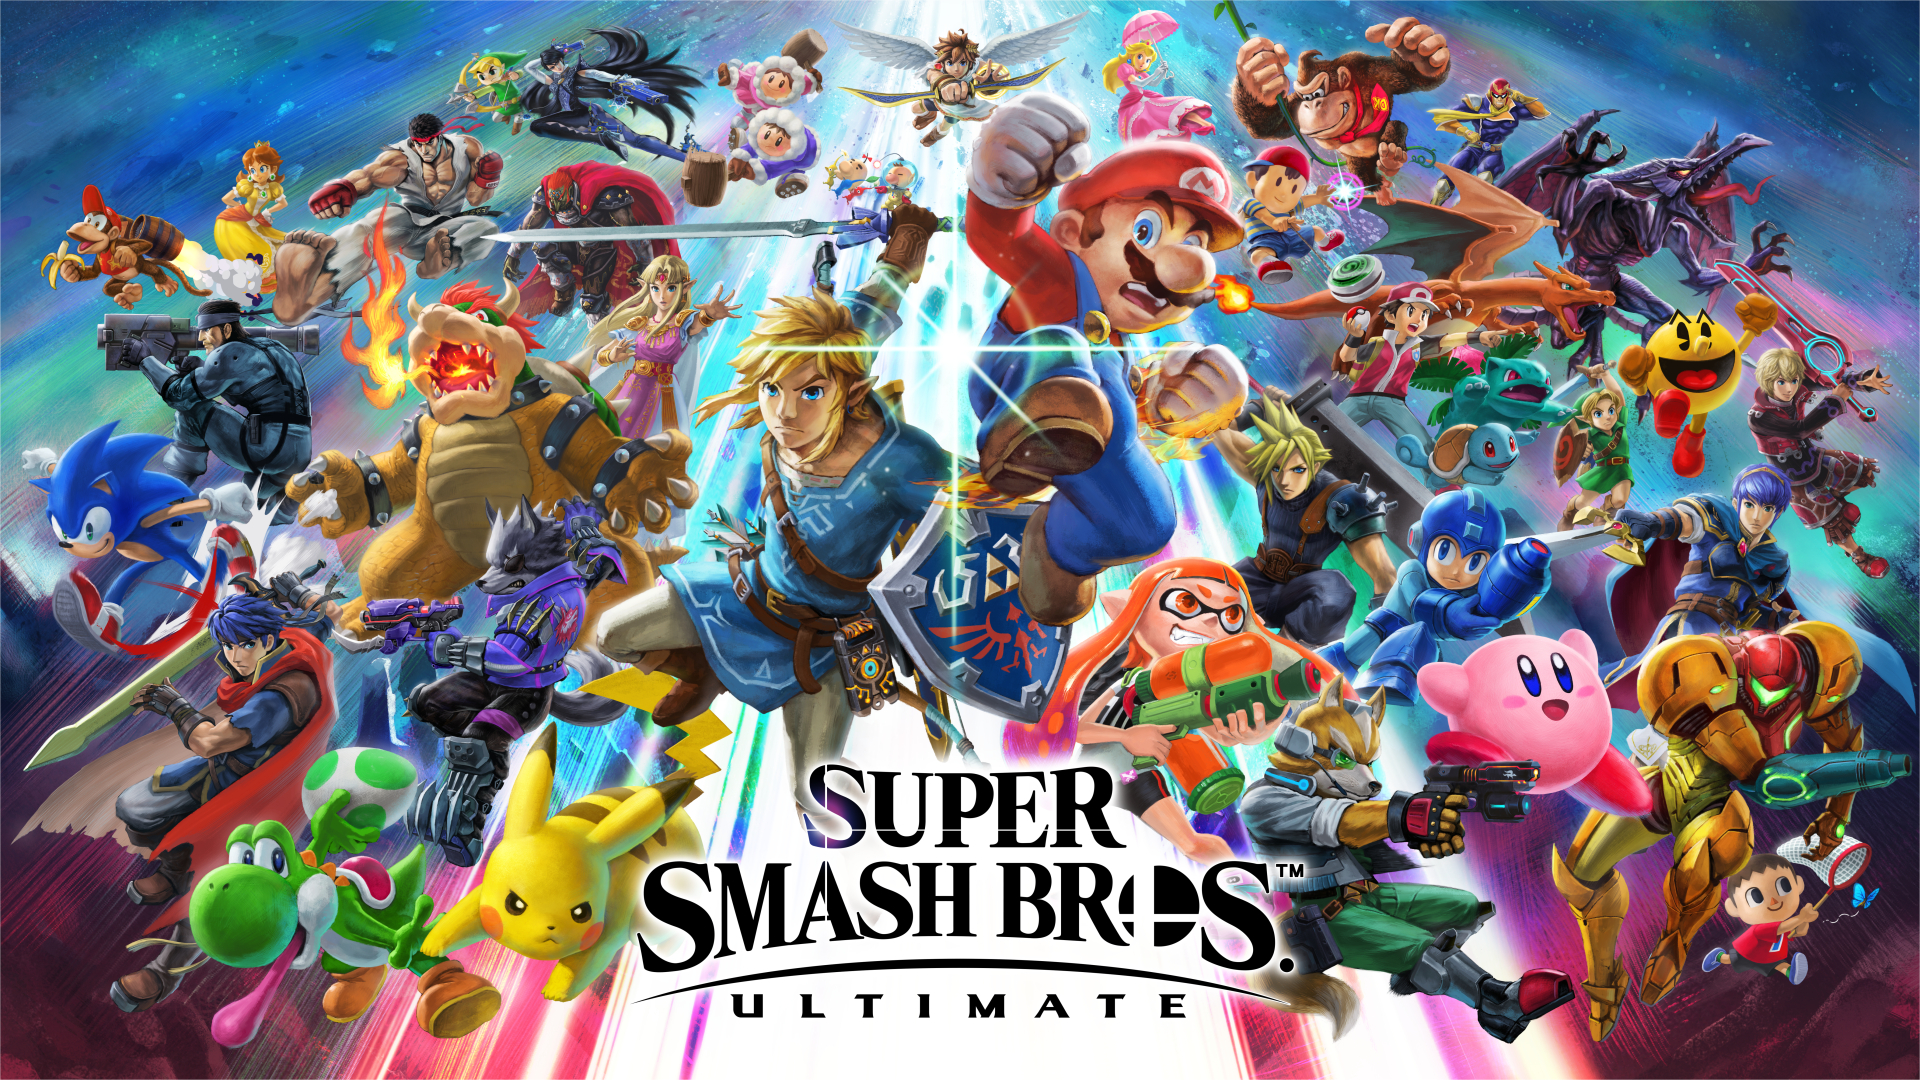 1920x1080 270+ Super Smash Bros. Ultimate HD Wallpapers and Backgrounds